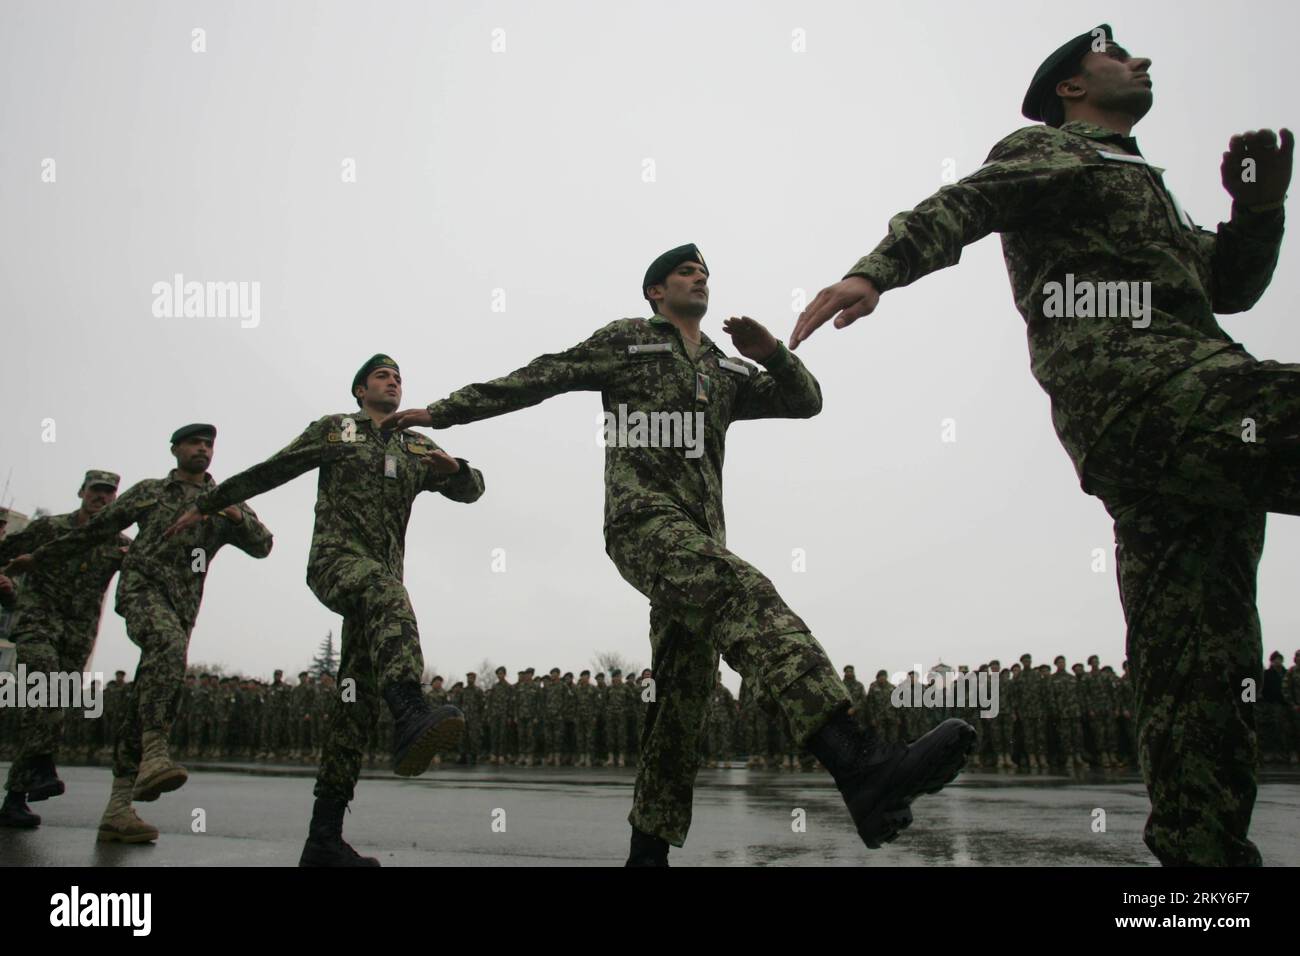 Bildnummer: 59155820  Datum: 31.01.2013  Copyright: imago/Xinhua (130131) -- KABUL, Jan. 31, 2013 (Xinhua) -- Newly graduated soldiers march during their graduation ceremony at the Kabul Military Training Center in Kabul, Afghanistan, on Jan. 31, 2013. A total of 1,400 soldiers graduated from Kabul Military Training Center (KMTC) on Thursday and were commissioned to Afghan National Army (ANA), General Aminullah Patyannai commander of KMTC said. (Xinhua/Ahmad Massoud) AFGHANISTAN-KABUL-SOLDIERS-GRADUATION PUBLICATIONxNOTxINxCHN Gesellschaft Militär Armee Soldat Ausbildung Militärausbildung Absc Stock Photo